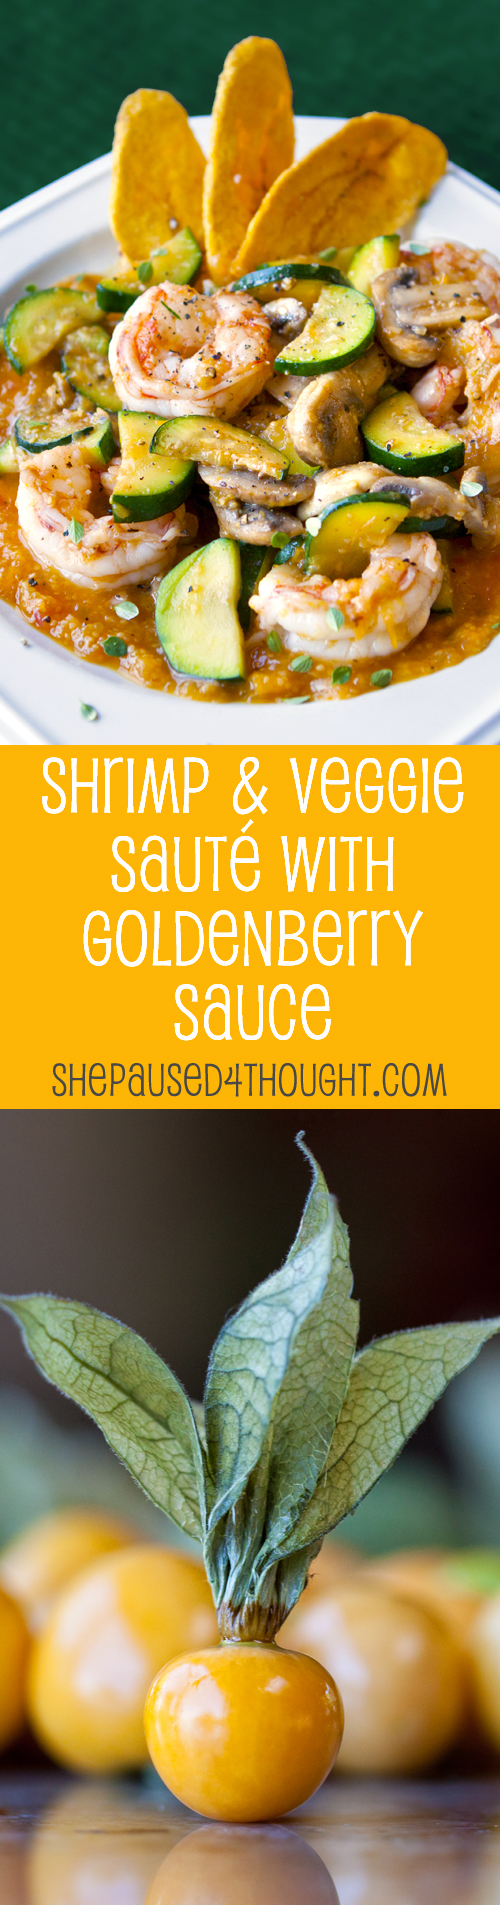 Shrimp & Veggie Saute with Goldenberry Sauce | She Paused 4 Thought